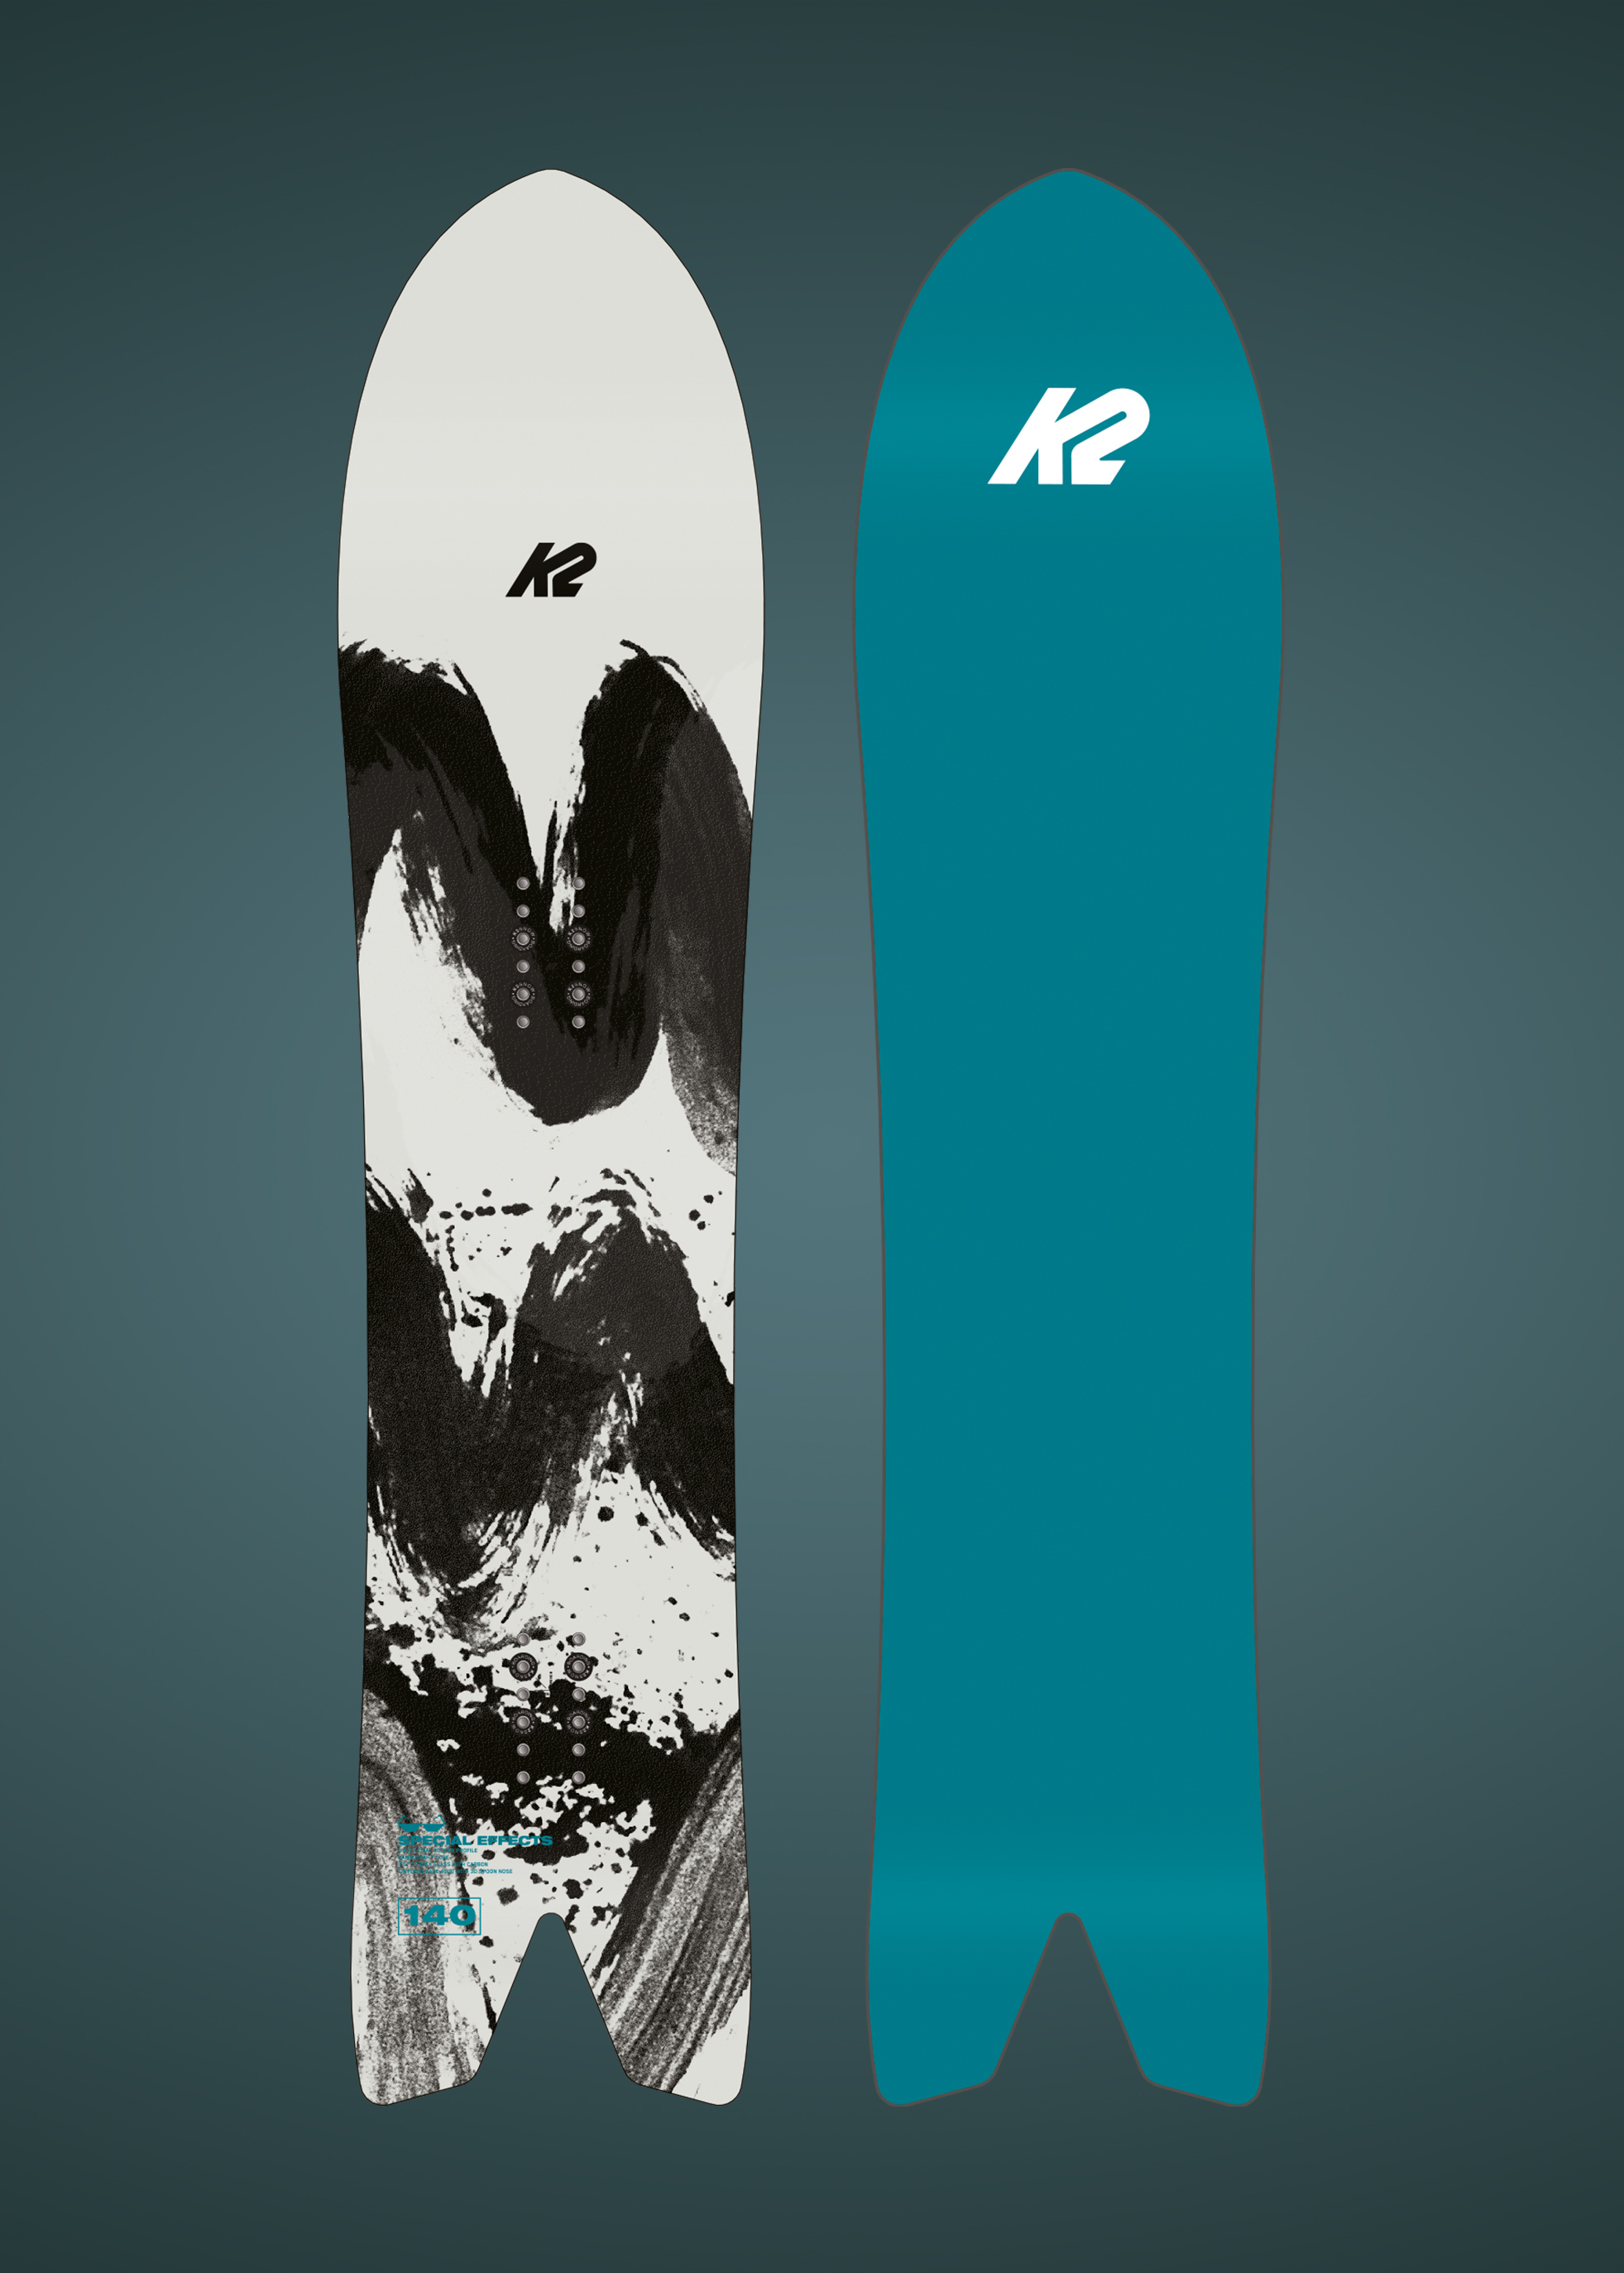 New Snowboard Gear | 2021-2022 Product Preview - Whi